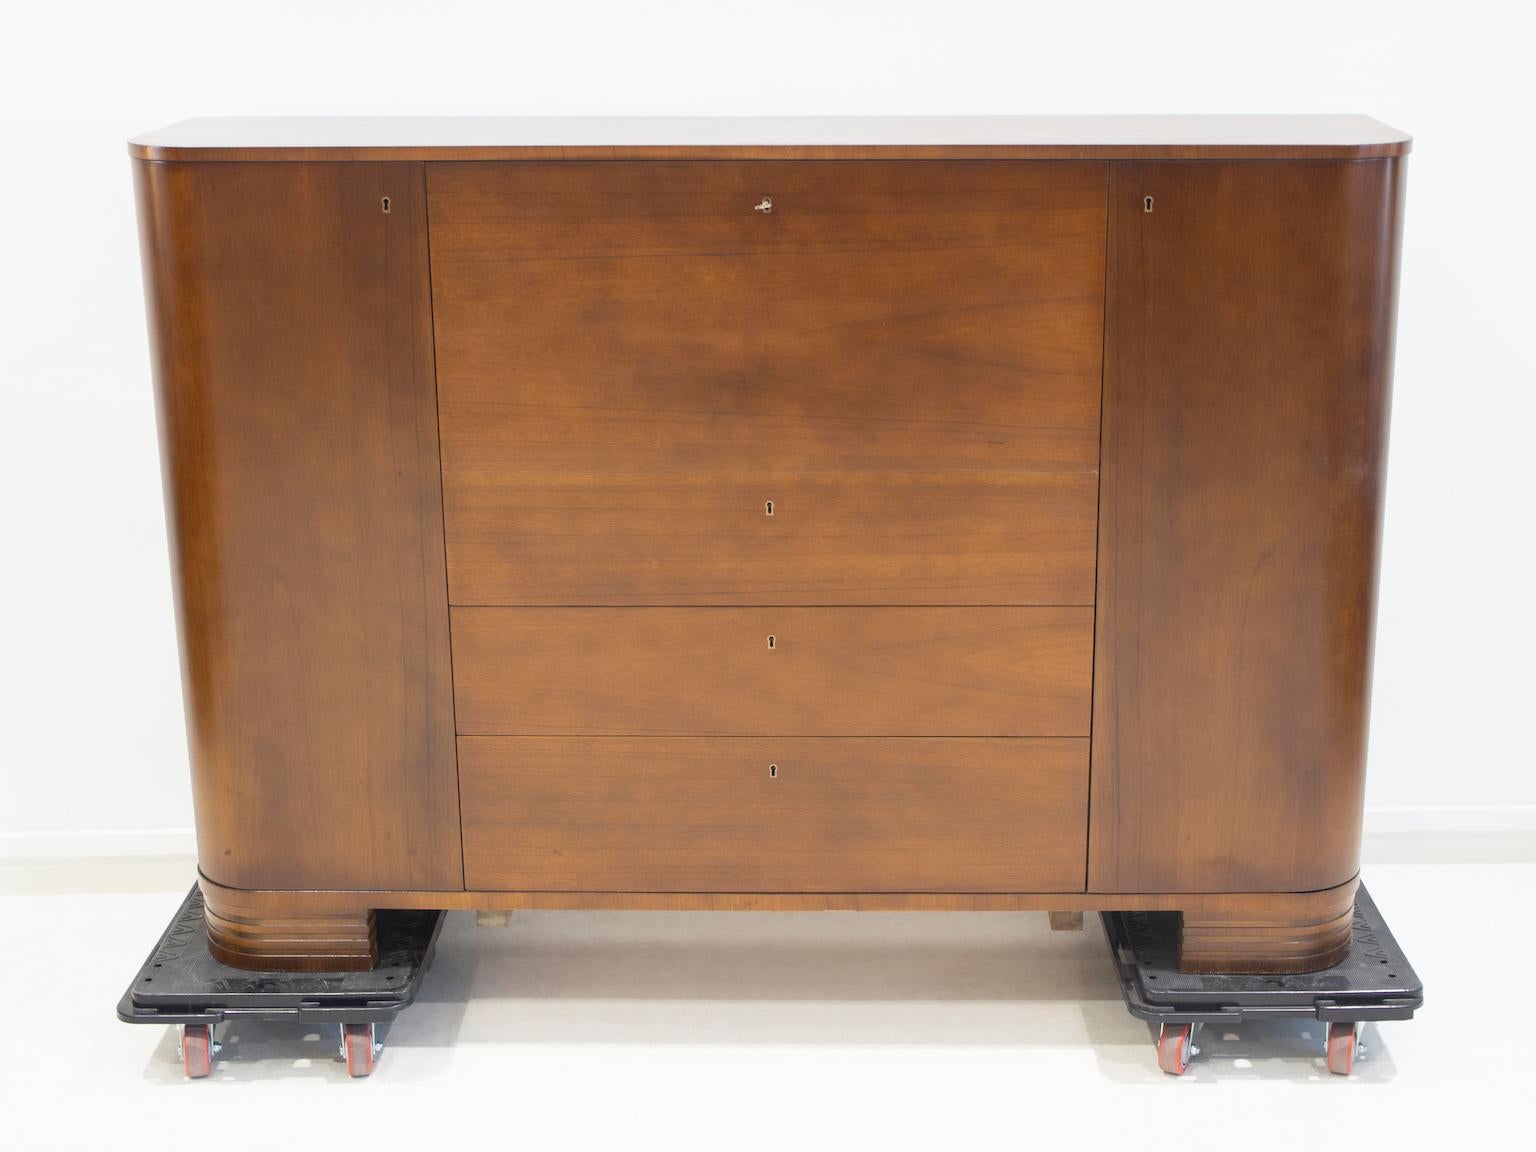 Swedish Modern style mahogany cabinet from circa 1940's. The two sides of the sideboard open up to reveal shelves. Three large drawers in the middle and a drop-down door on the top behind which are small drawers and shelves. Key included.